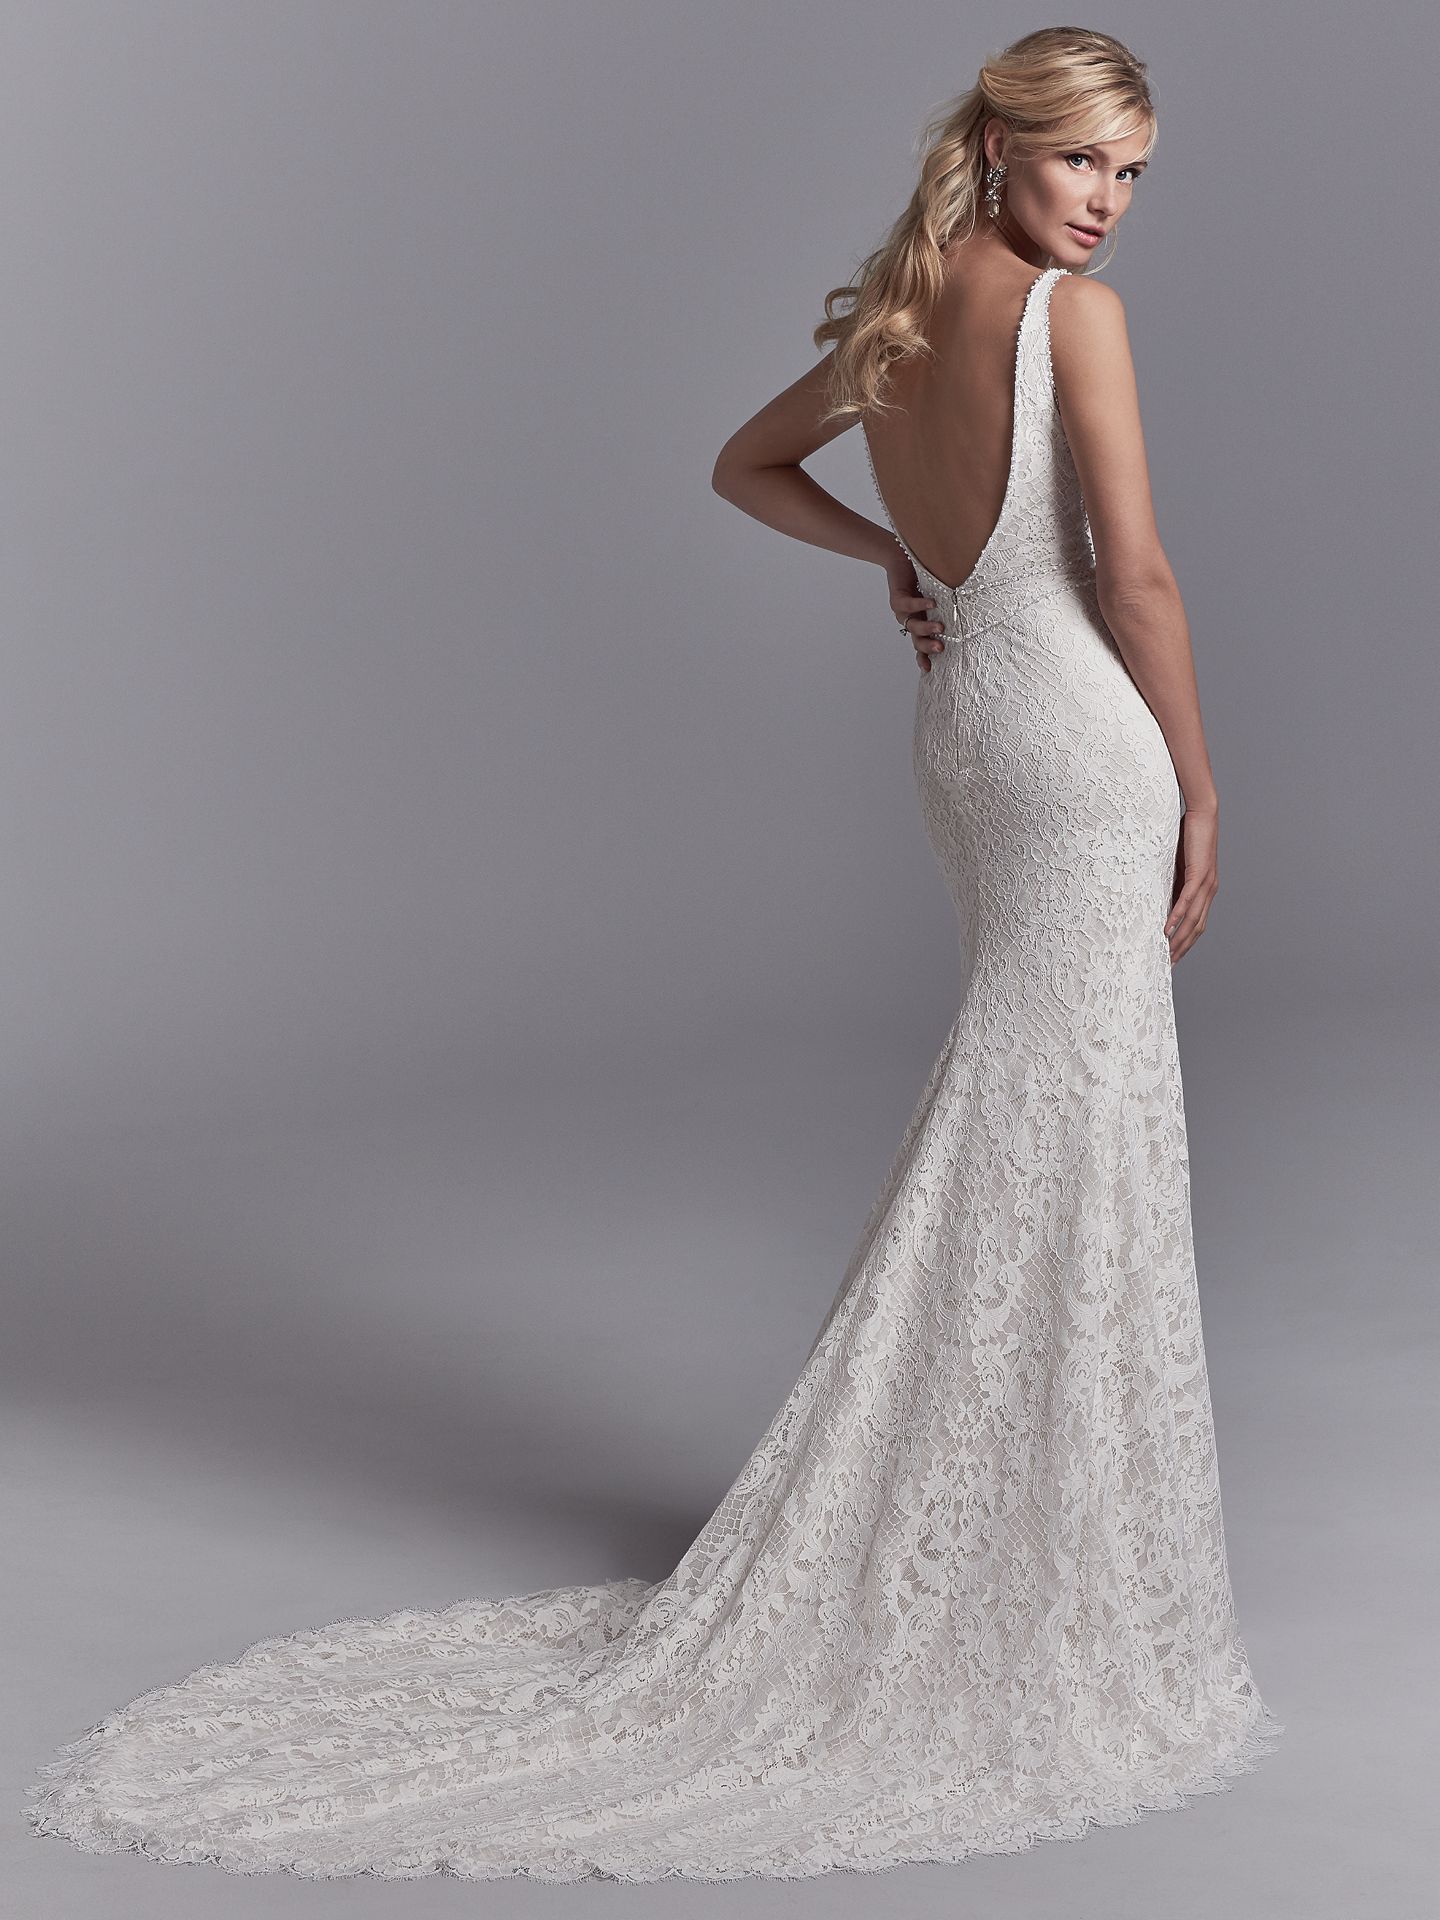 Regan wedding dress features allover lace motifs cascade over crosshatched tulle in this fit-and-flare wedding dress. - The Latest Wedding Dress Trends for Engagement Season 2018